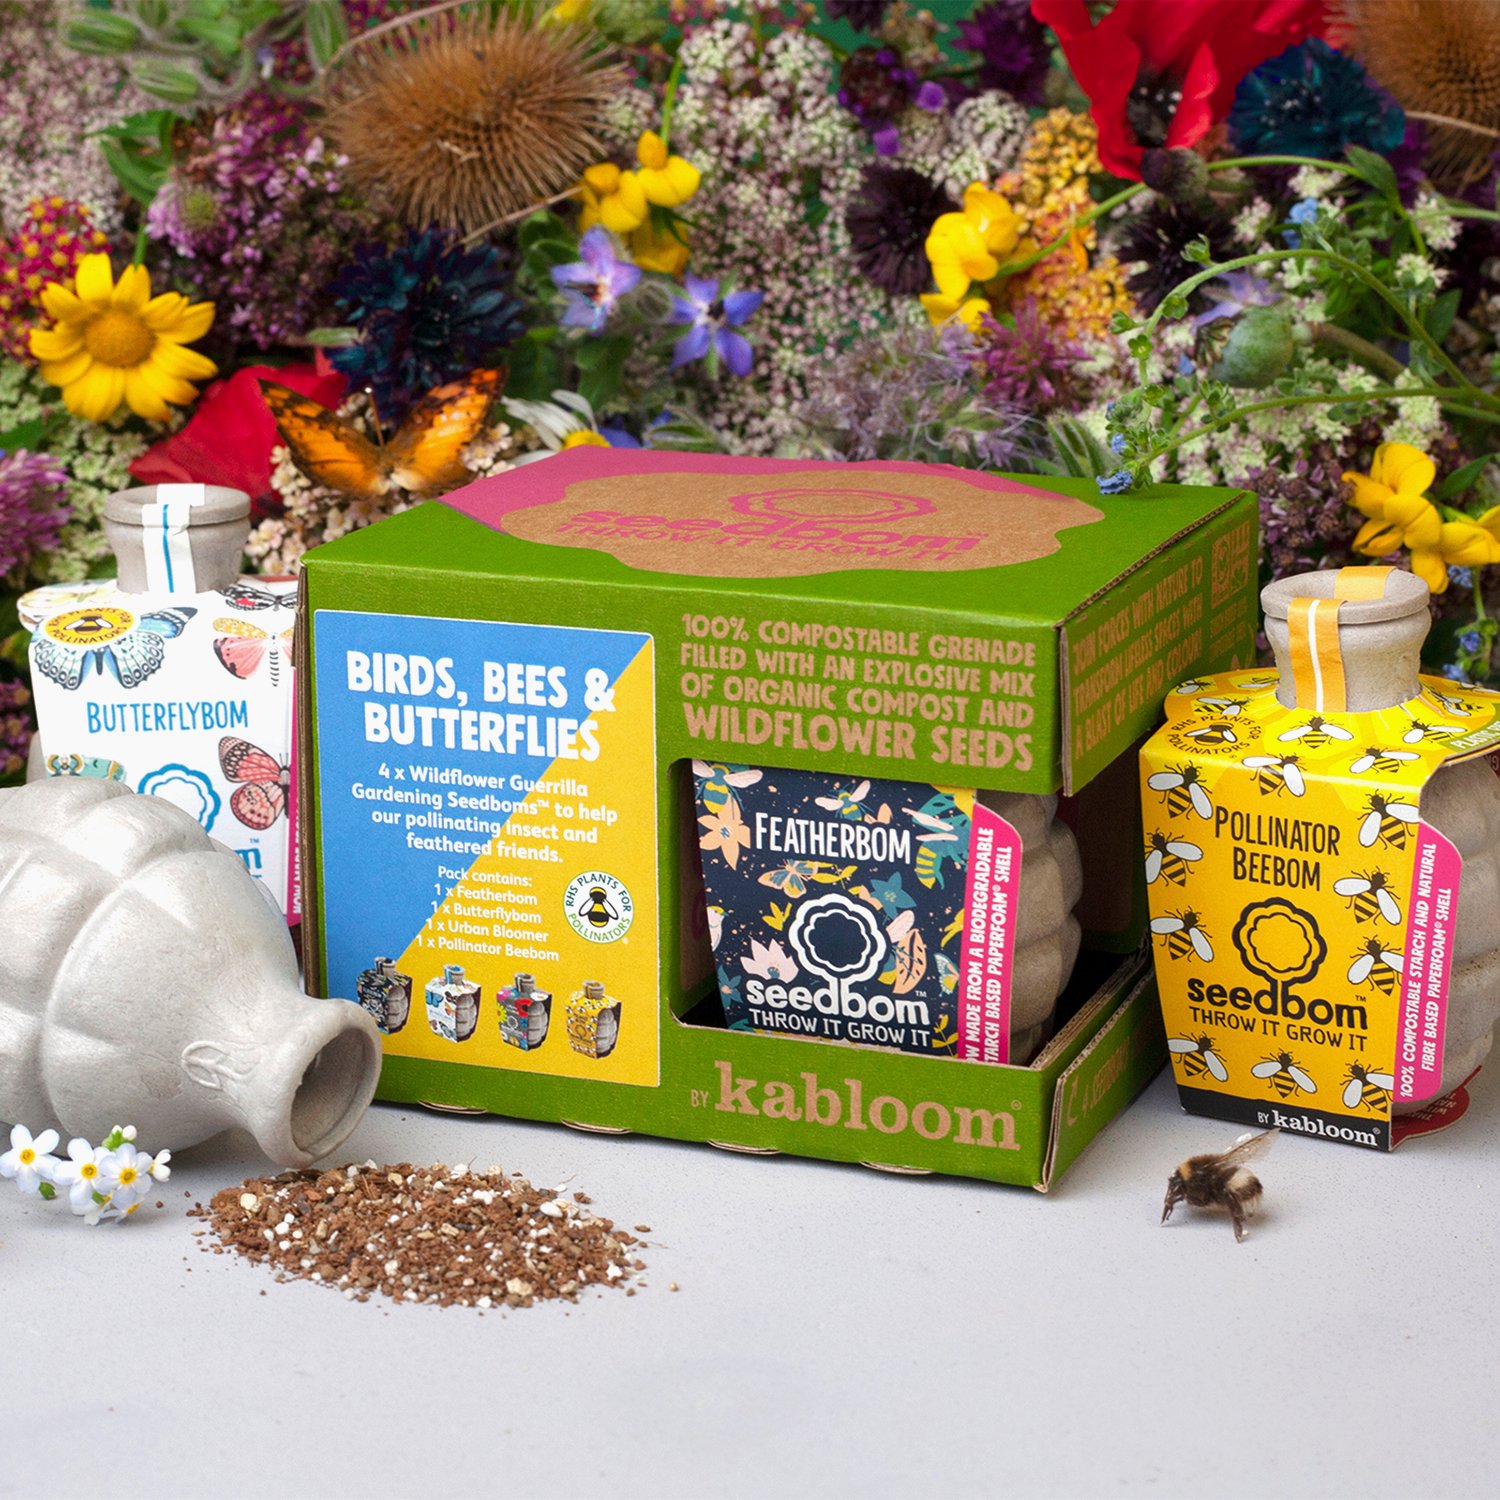 Seedbom is a great gardening kit for kids